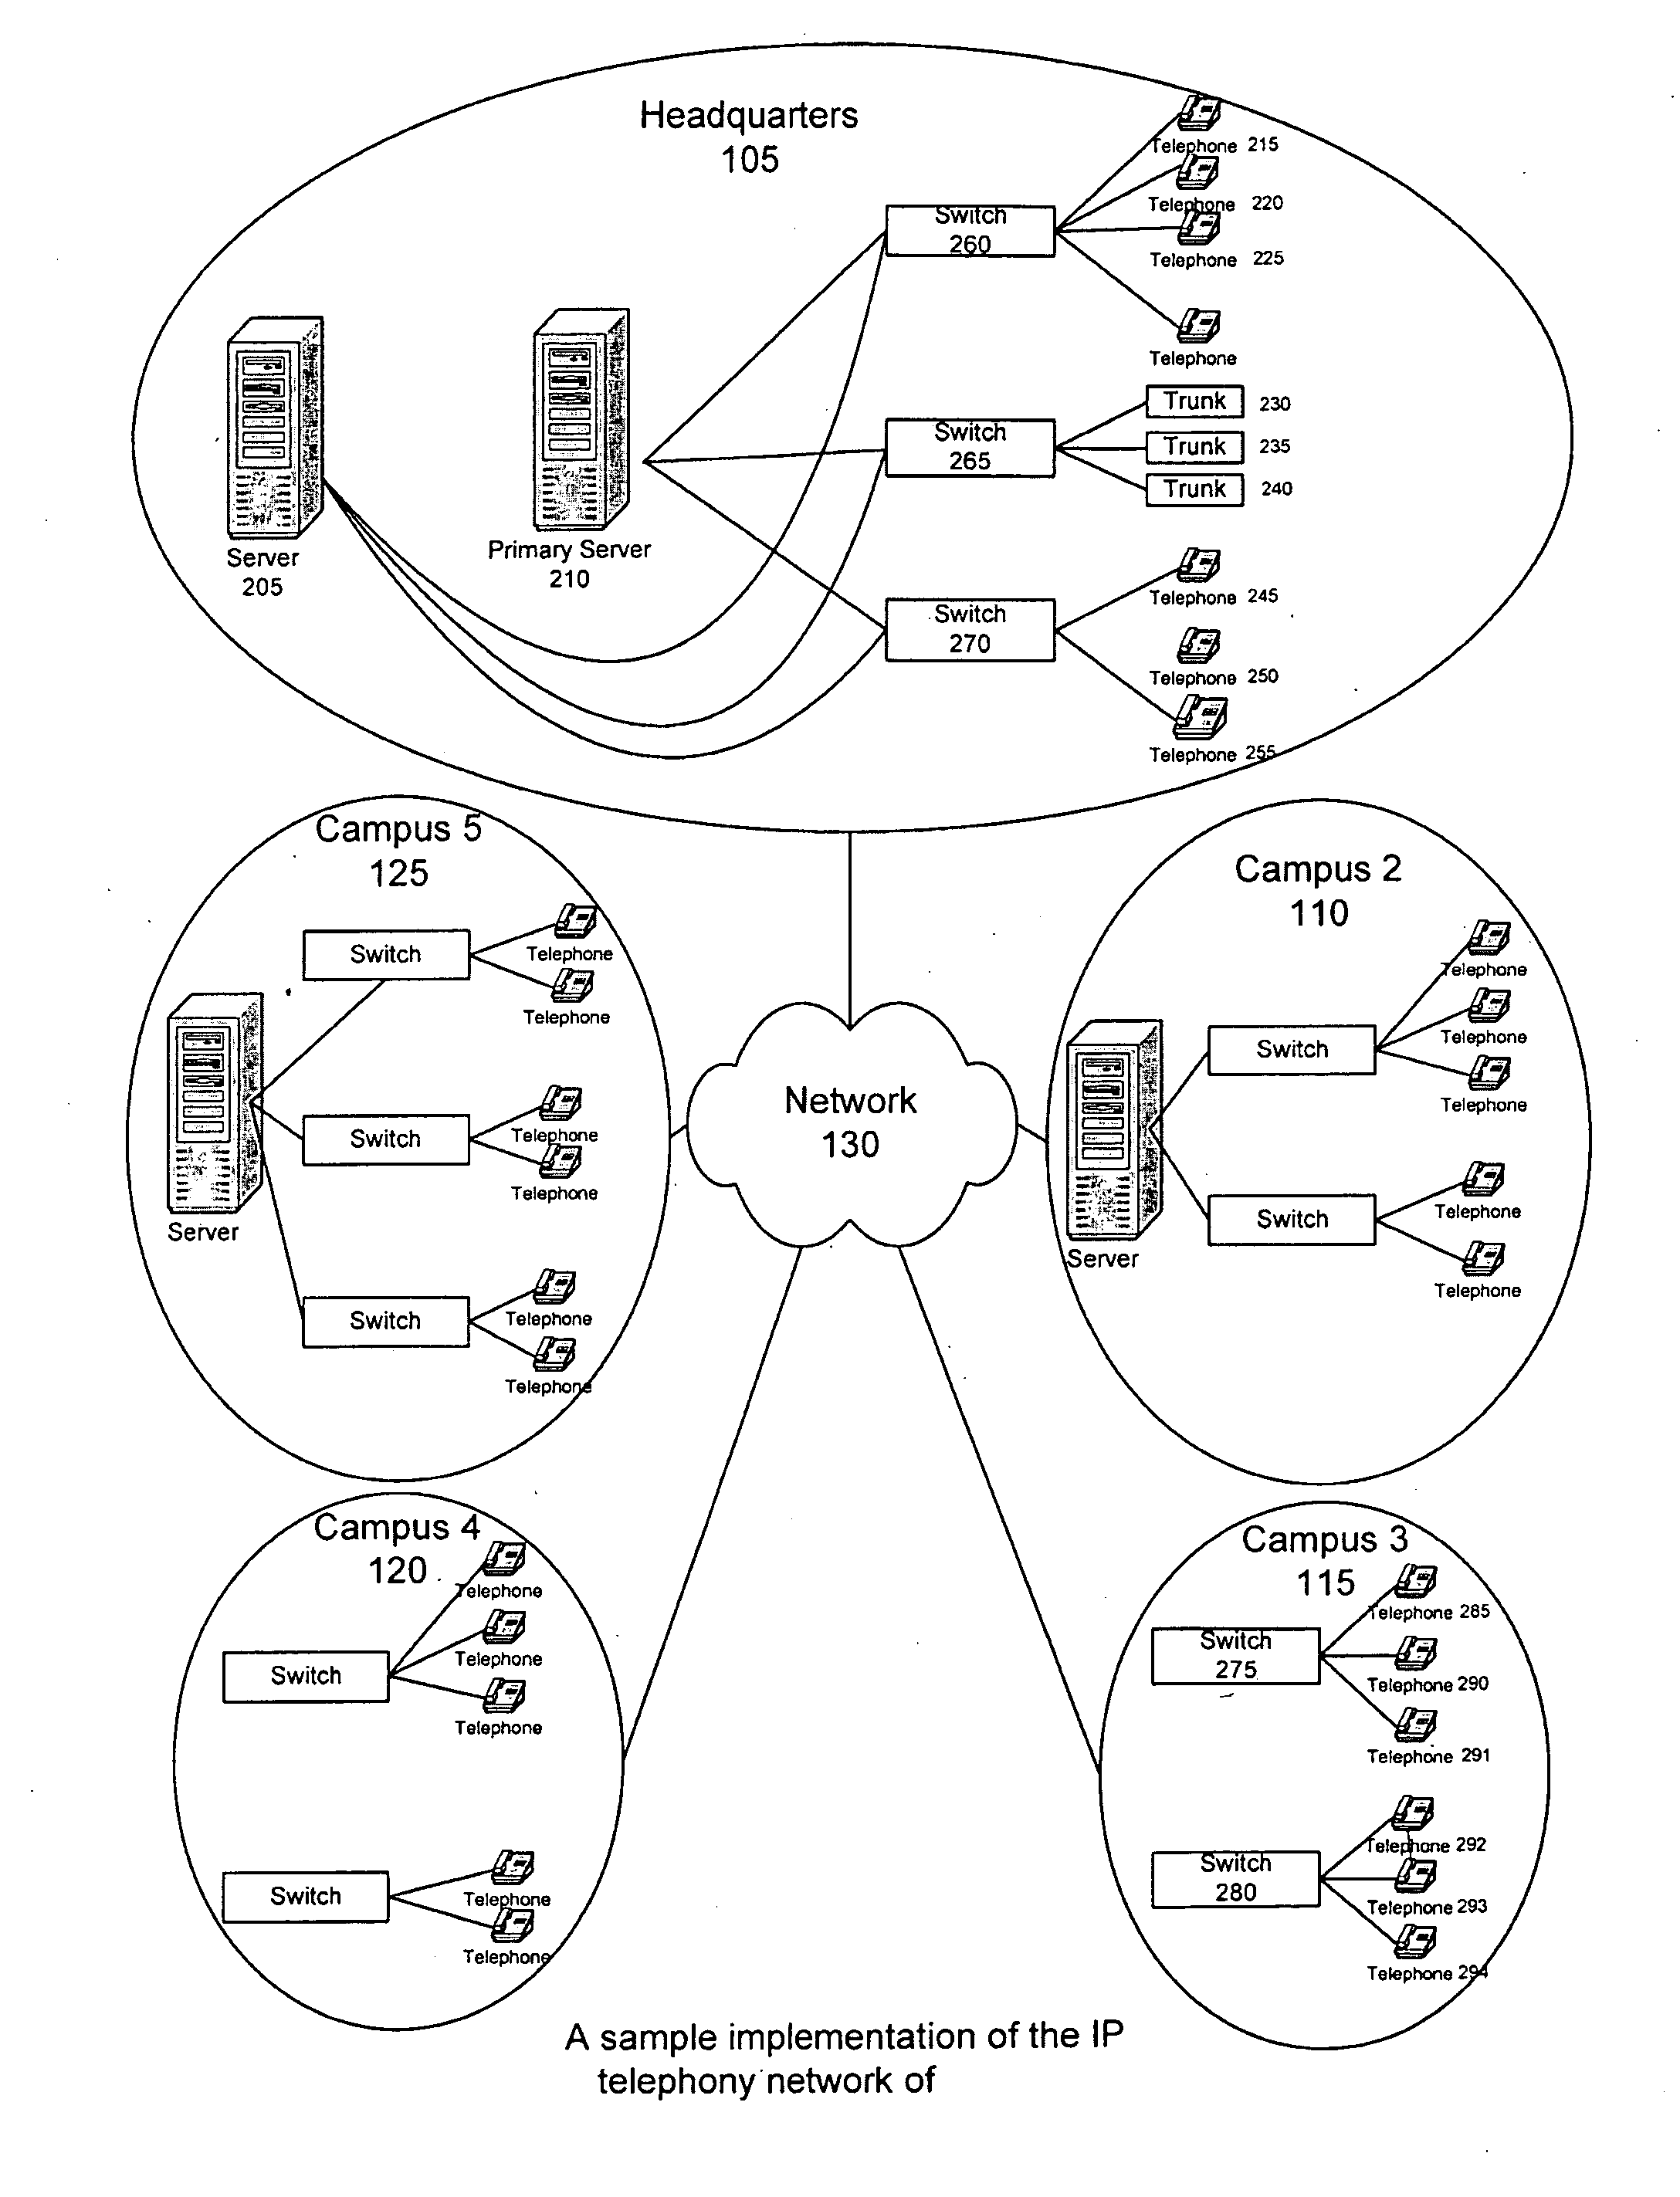 IP telephony network using a configuration map for organizing sites in a tree-like hierarchy